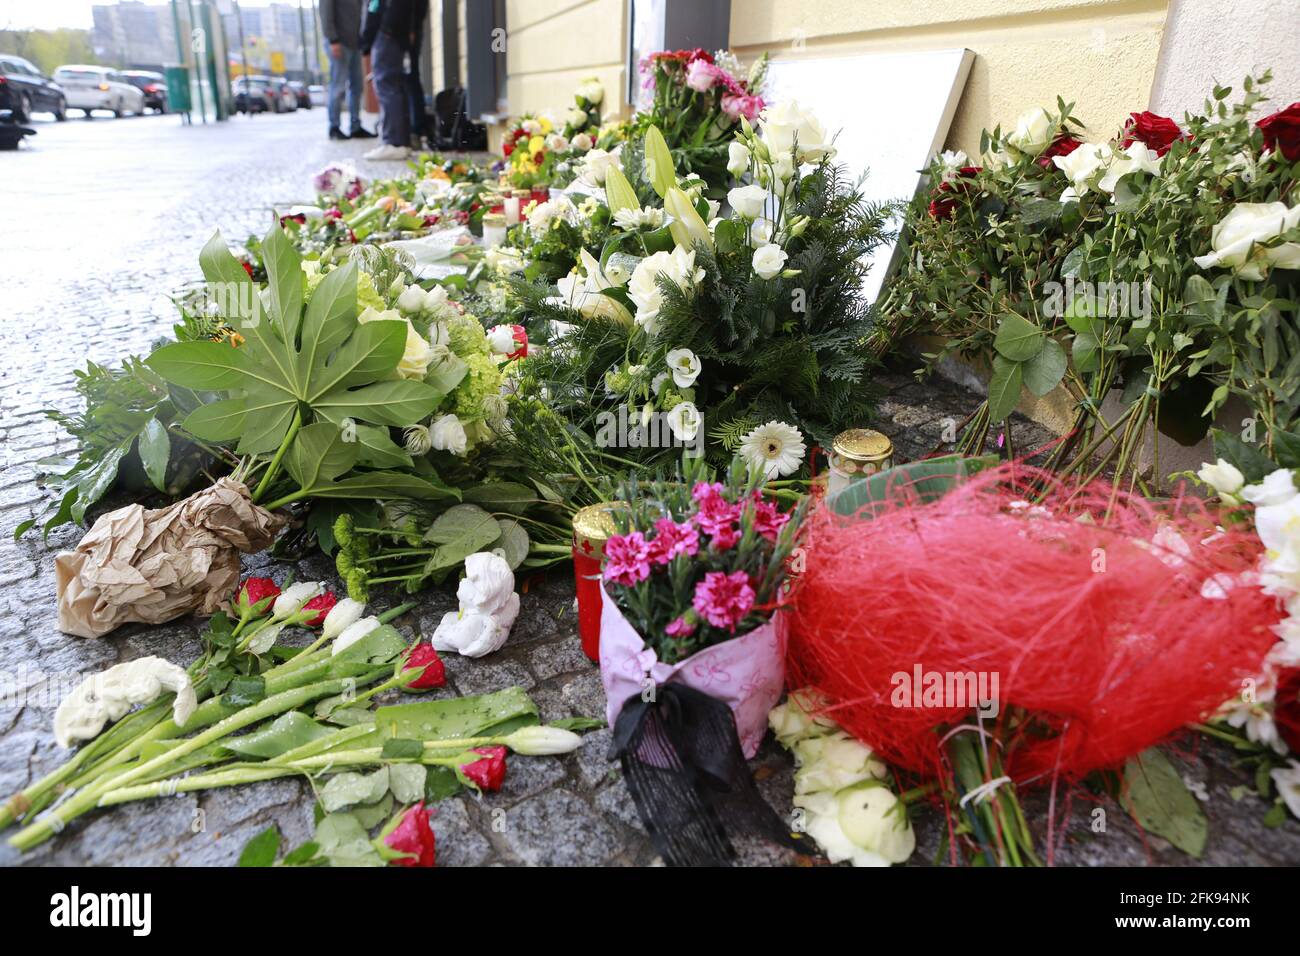 04/29/2021, Potsdam, Germany,. Flowers and signs in front of the house. Four dead were discovered in the 'Oberlin-Lebenswelten' care facility in Potsdam for people with disabilities. An urgently suspect 51-year-old woman was arrested. The victims have stab wounds. Stock Photo